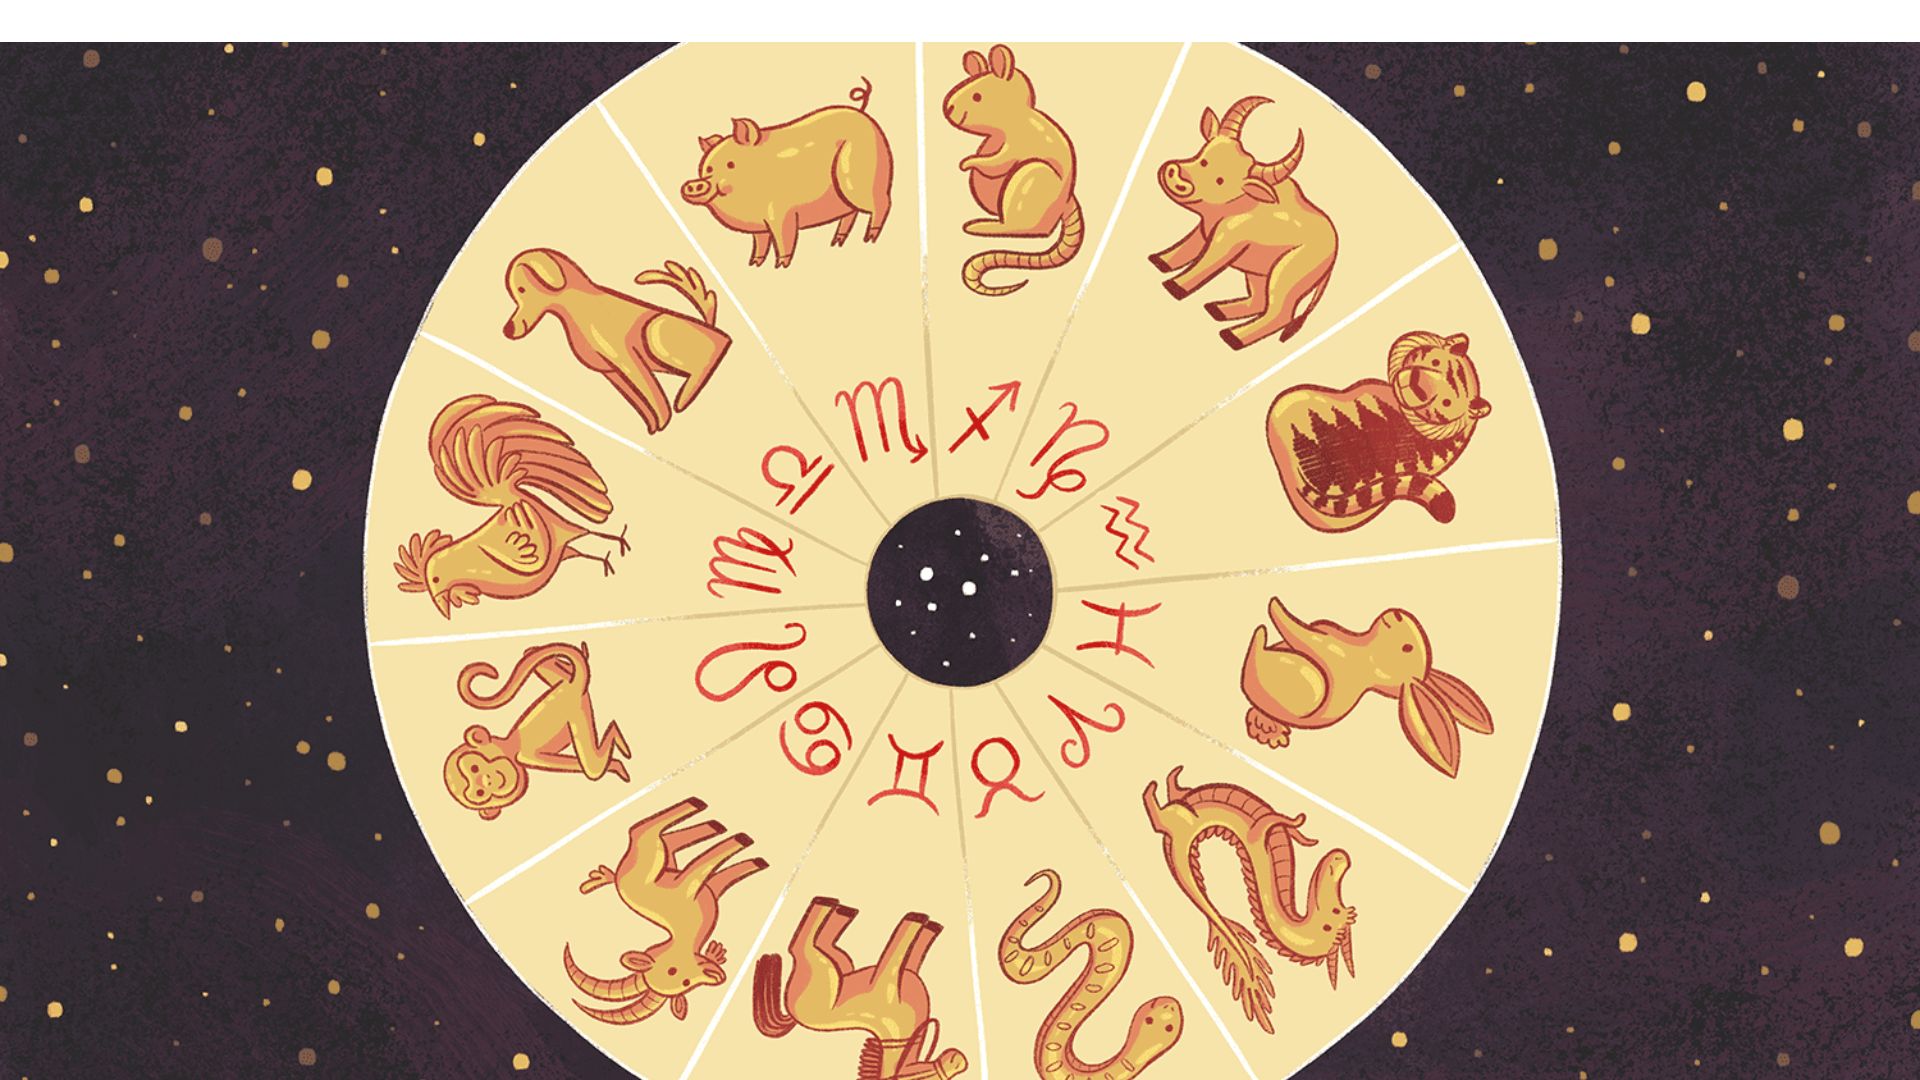 Zodiac Sign And Images In A Circle